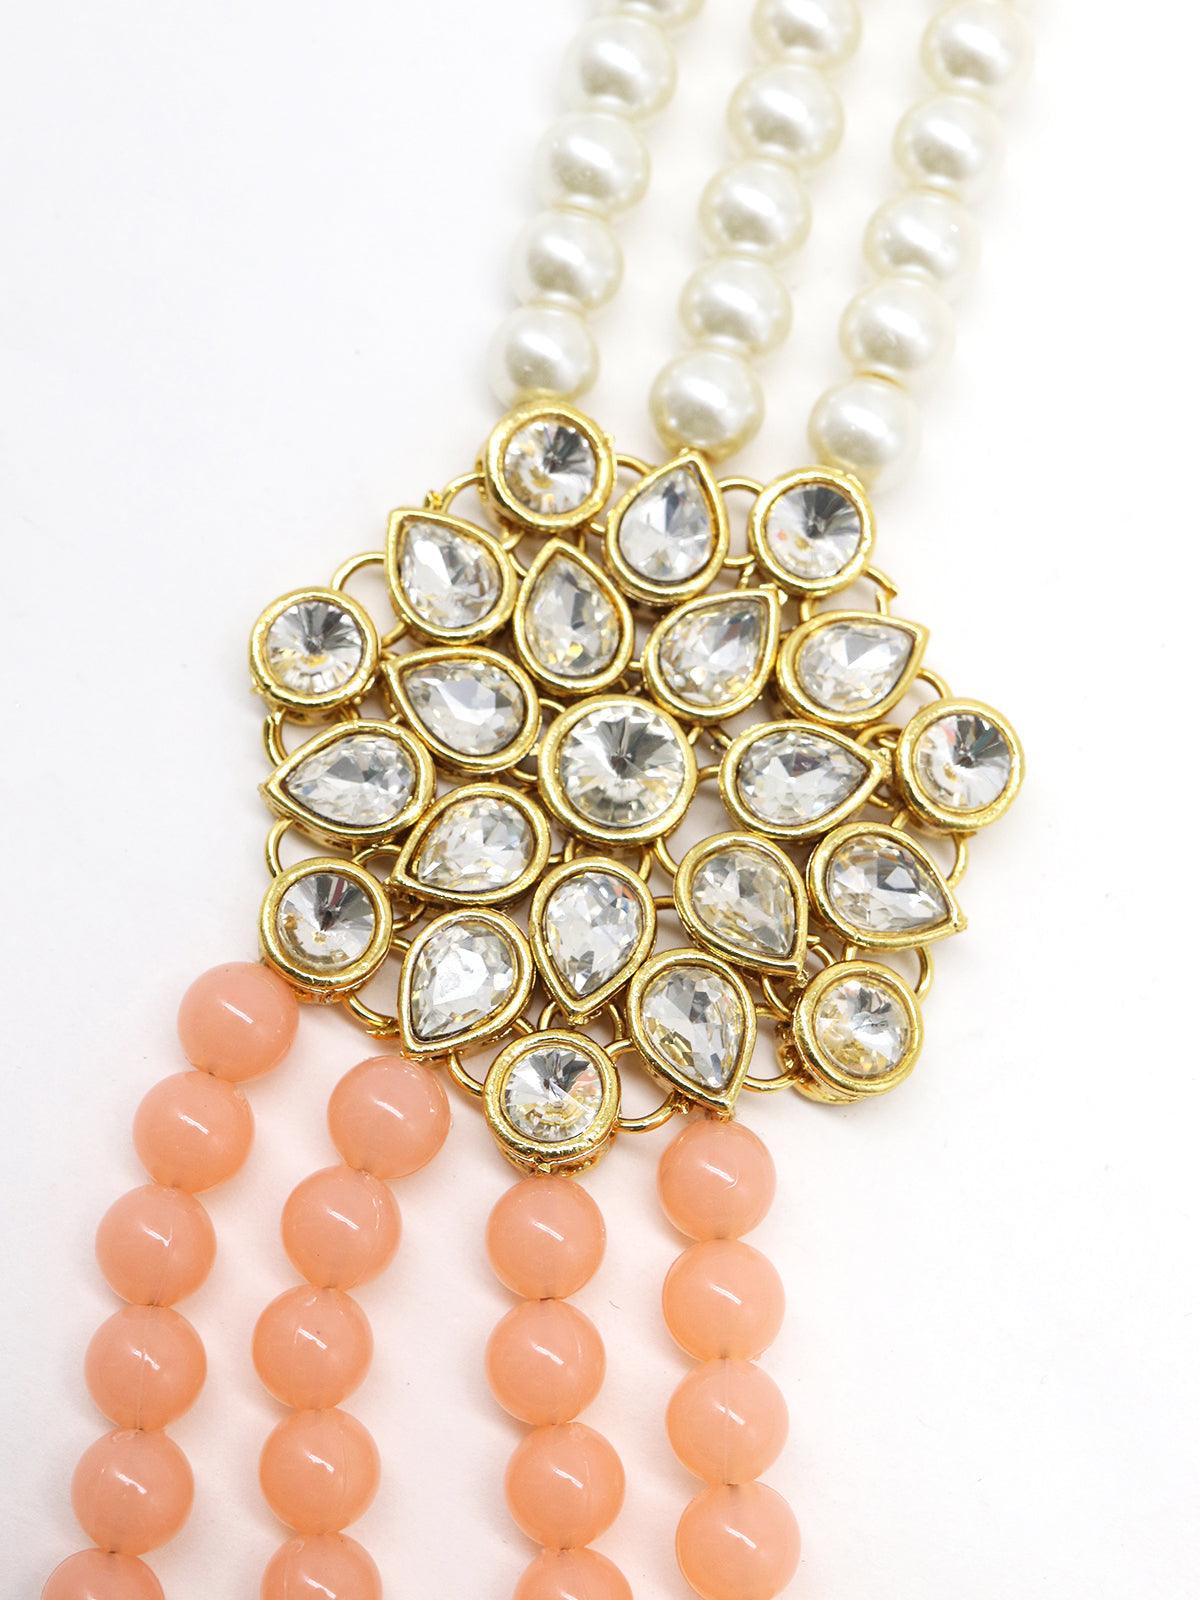 Peach and regular faux pearl necklace with earrings - Odette